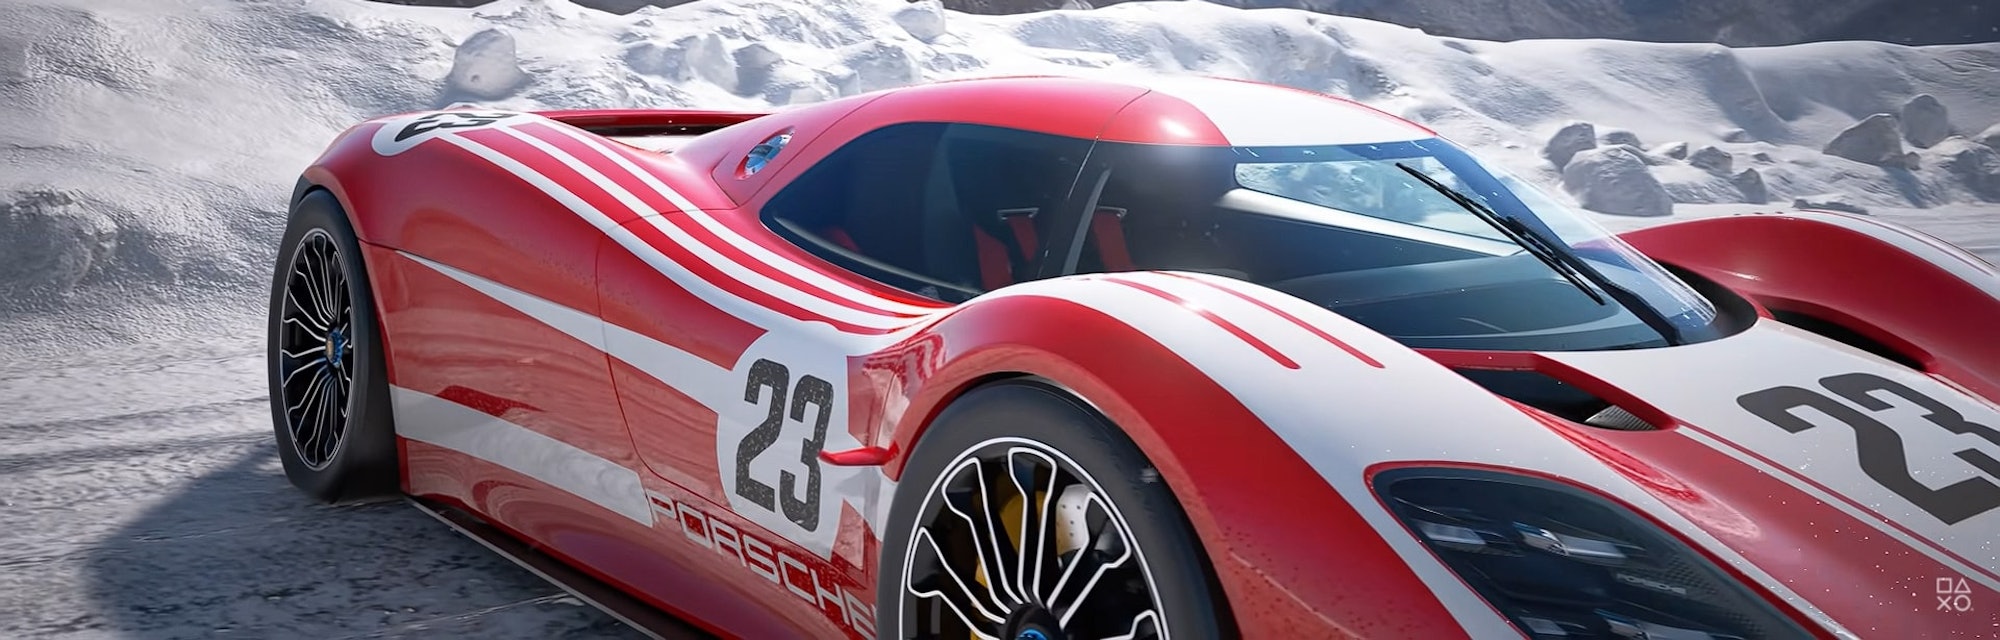 Rocky 'Gran Turismo 7' launch just keeps getting worse